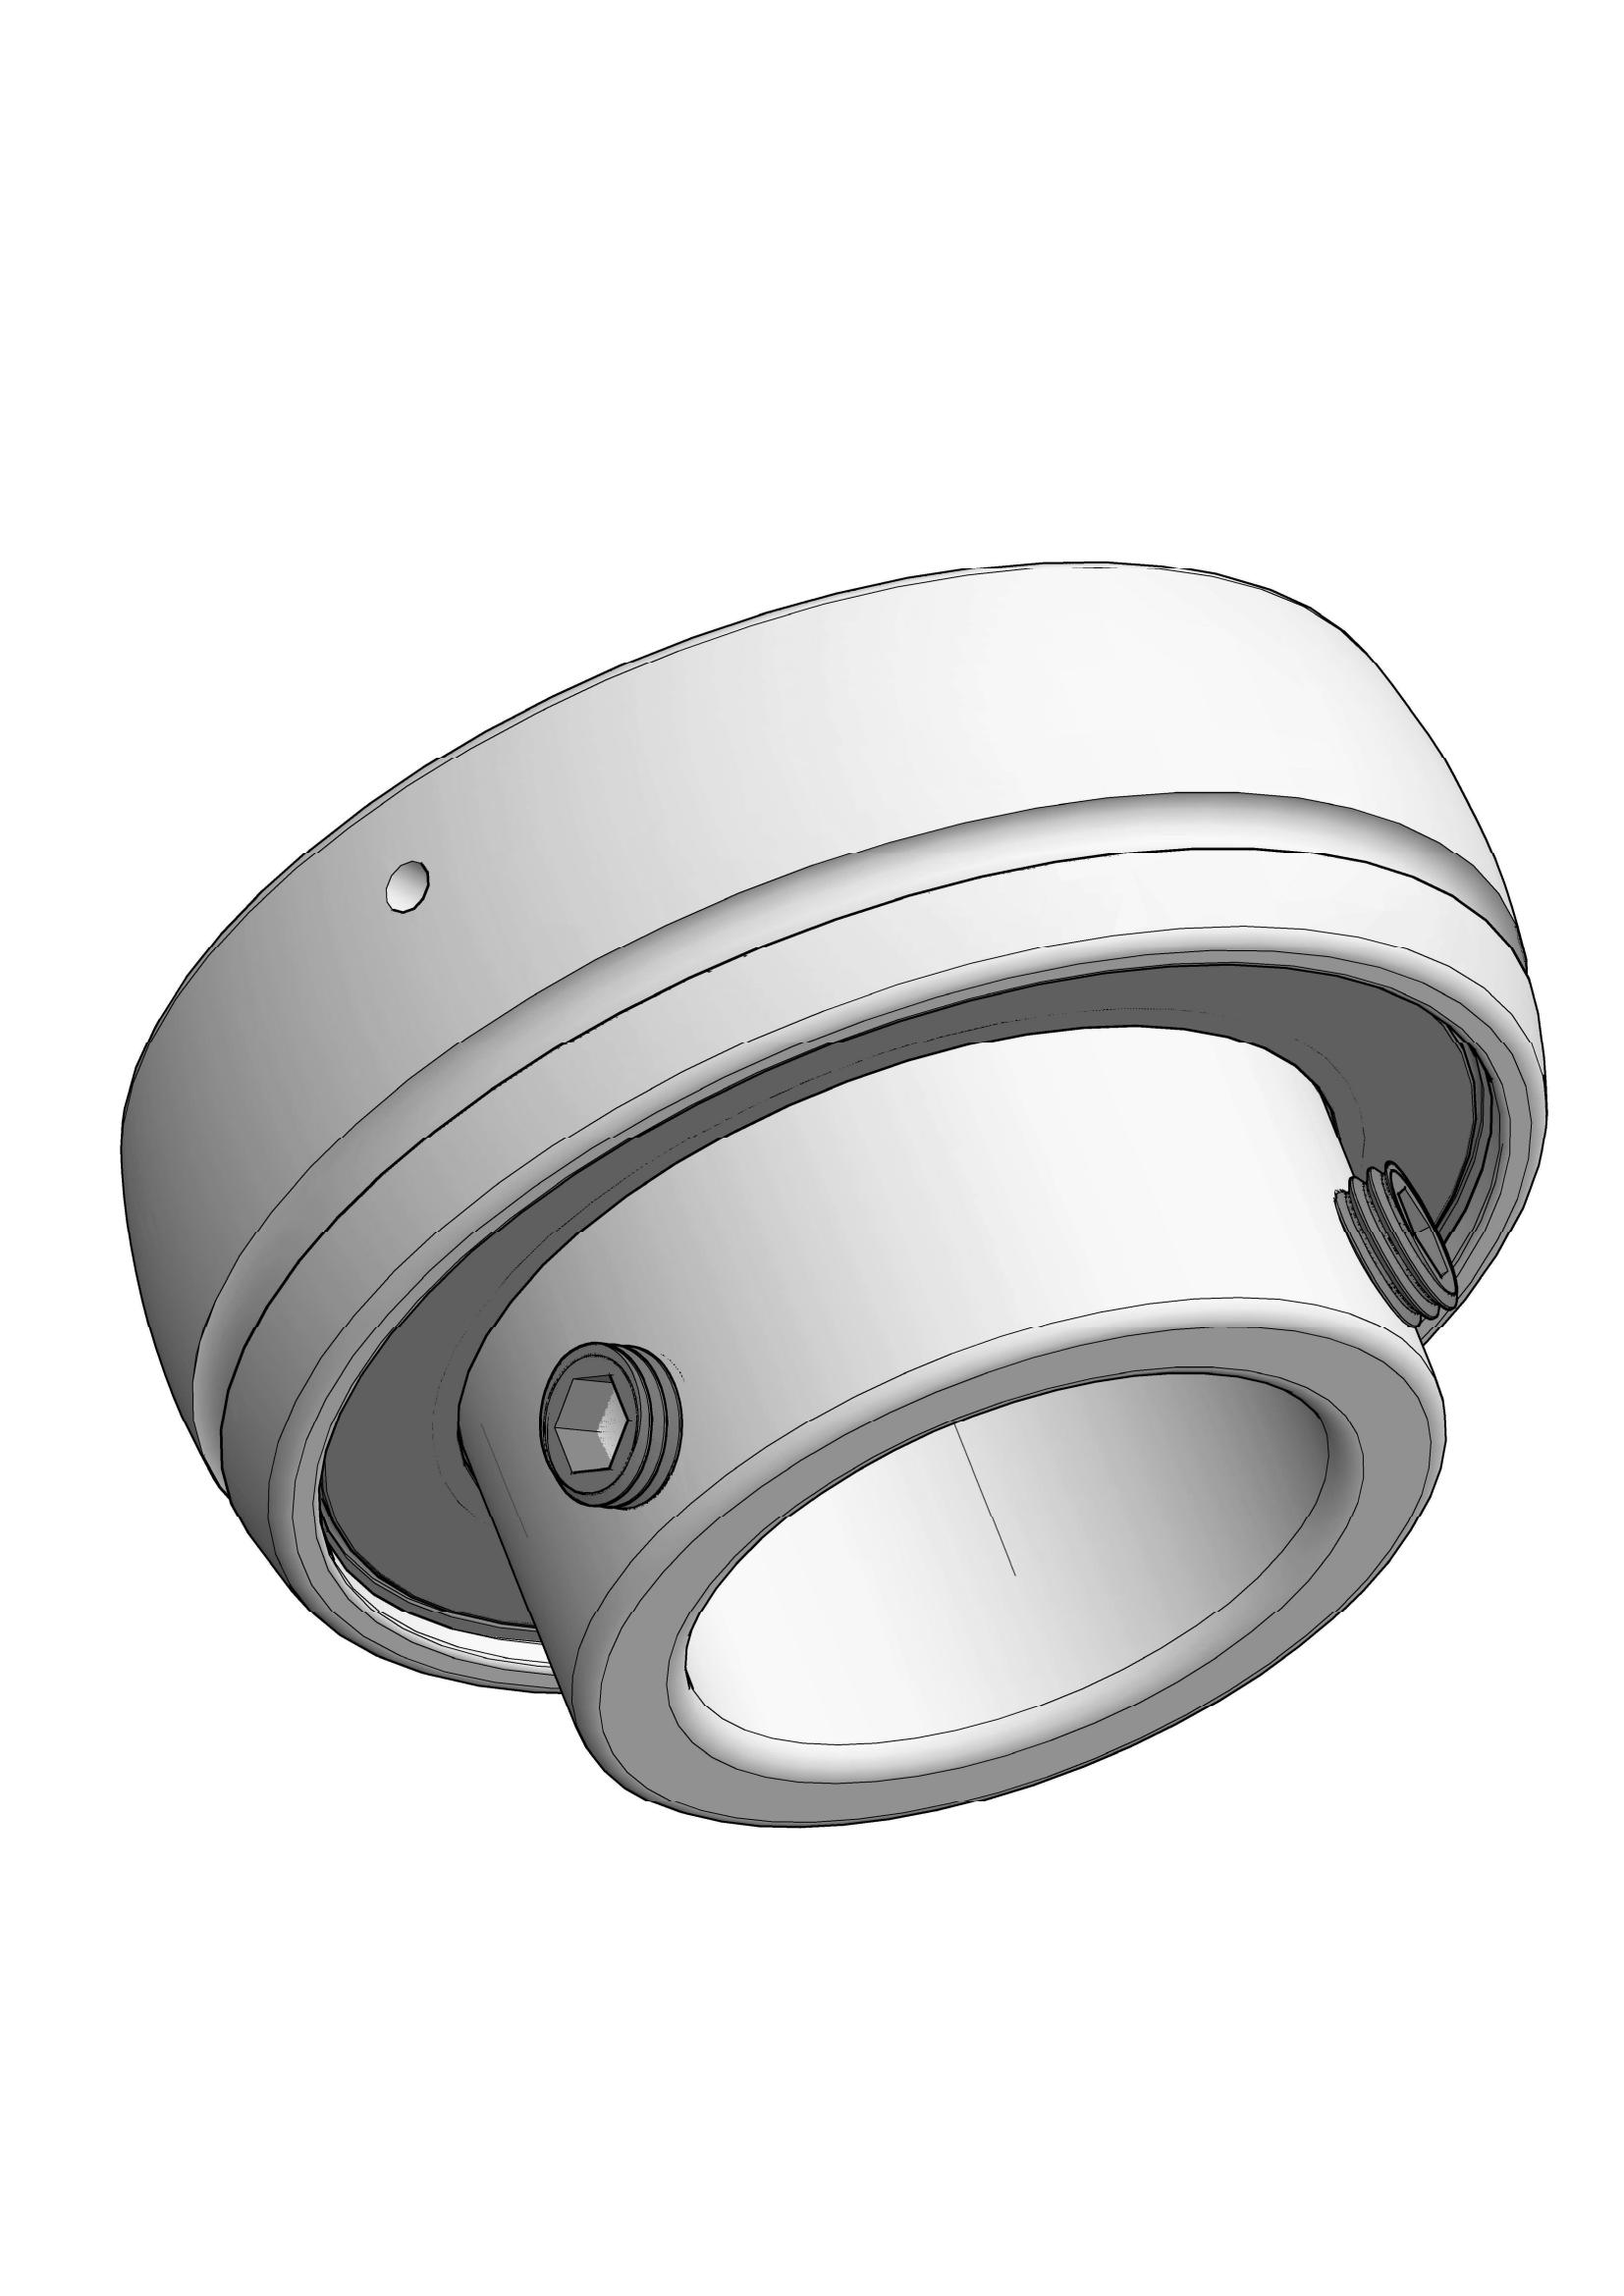 SB210 insert ball bearings with Eccentric Collar Lock with 50mm Bore